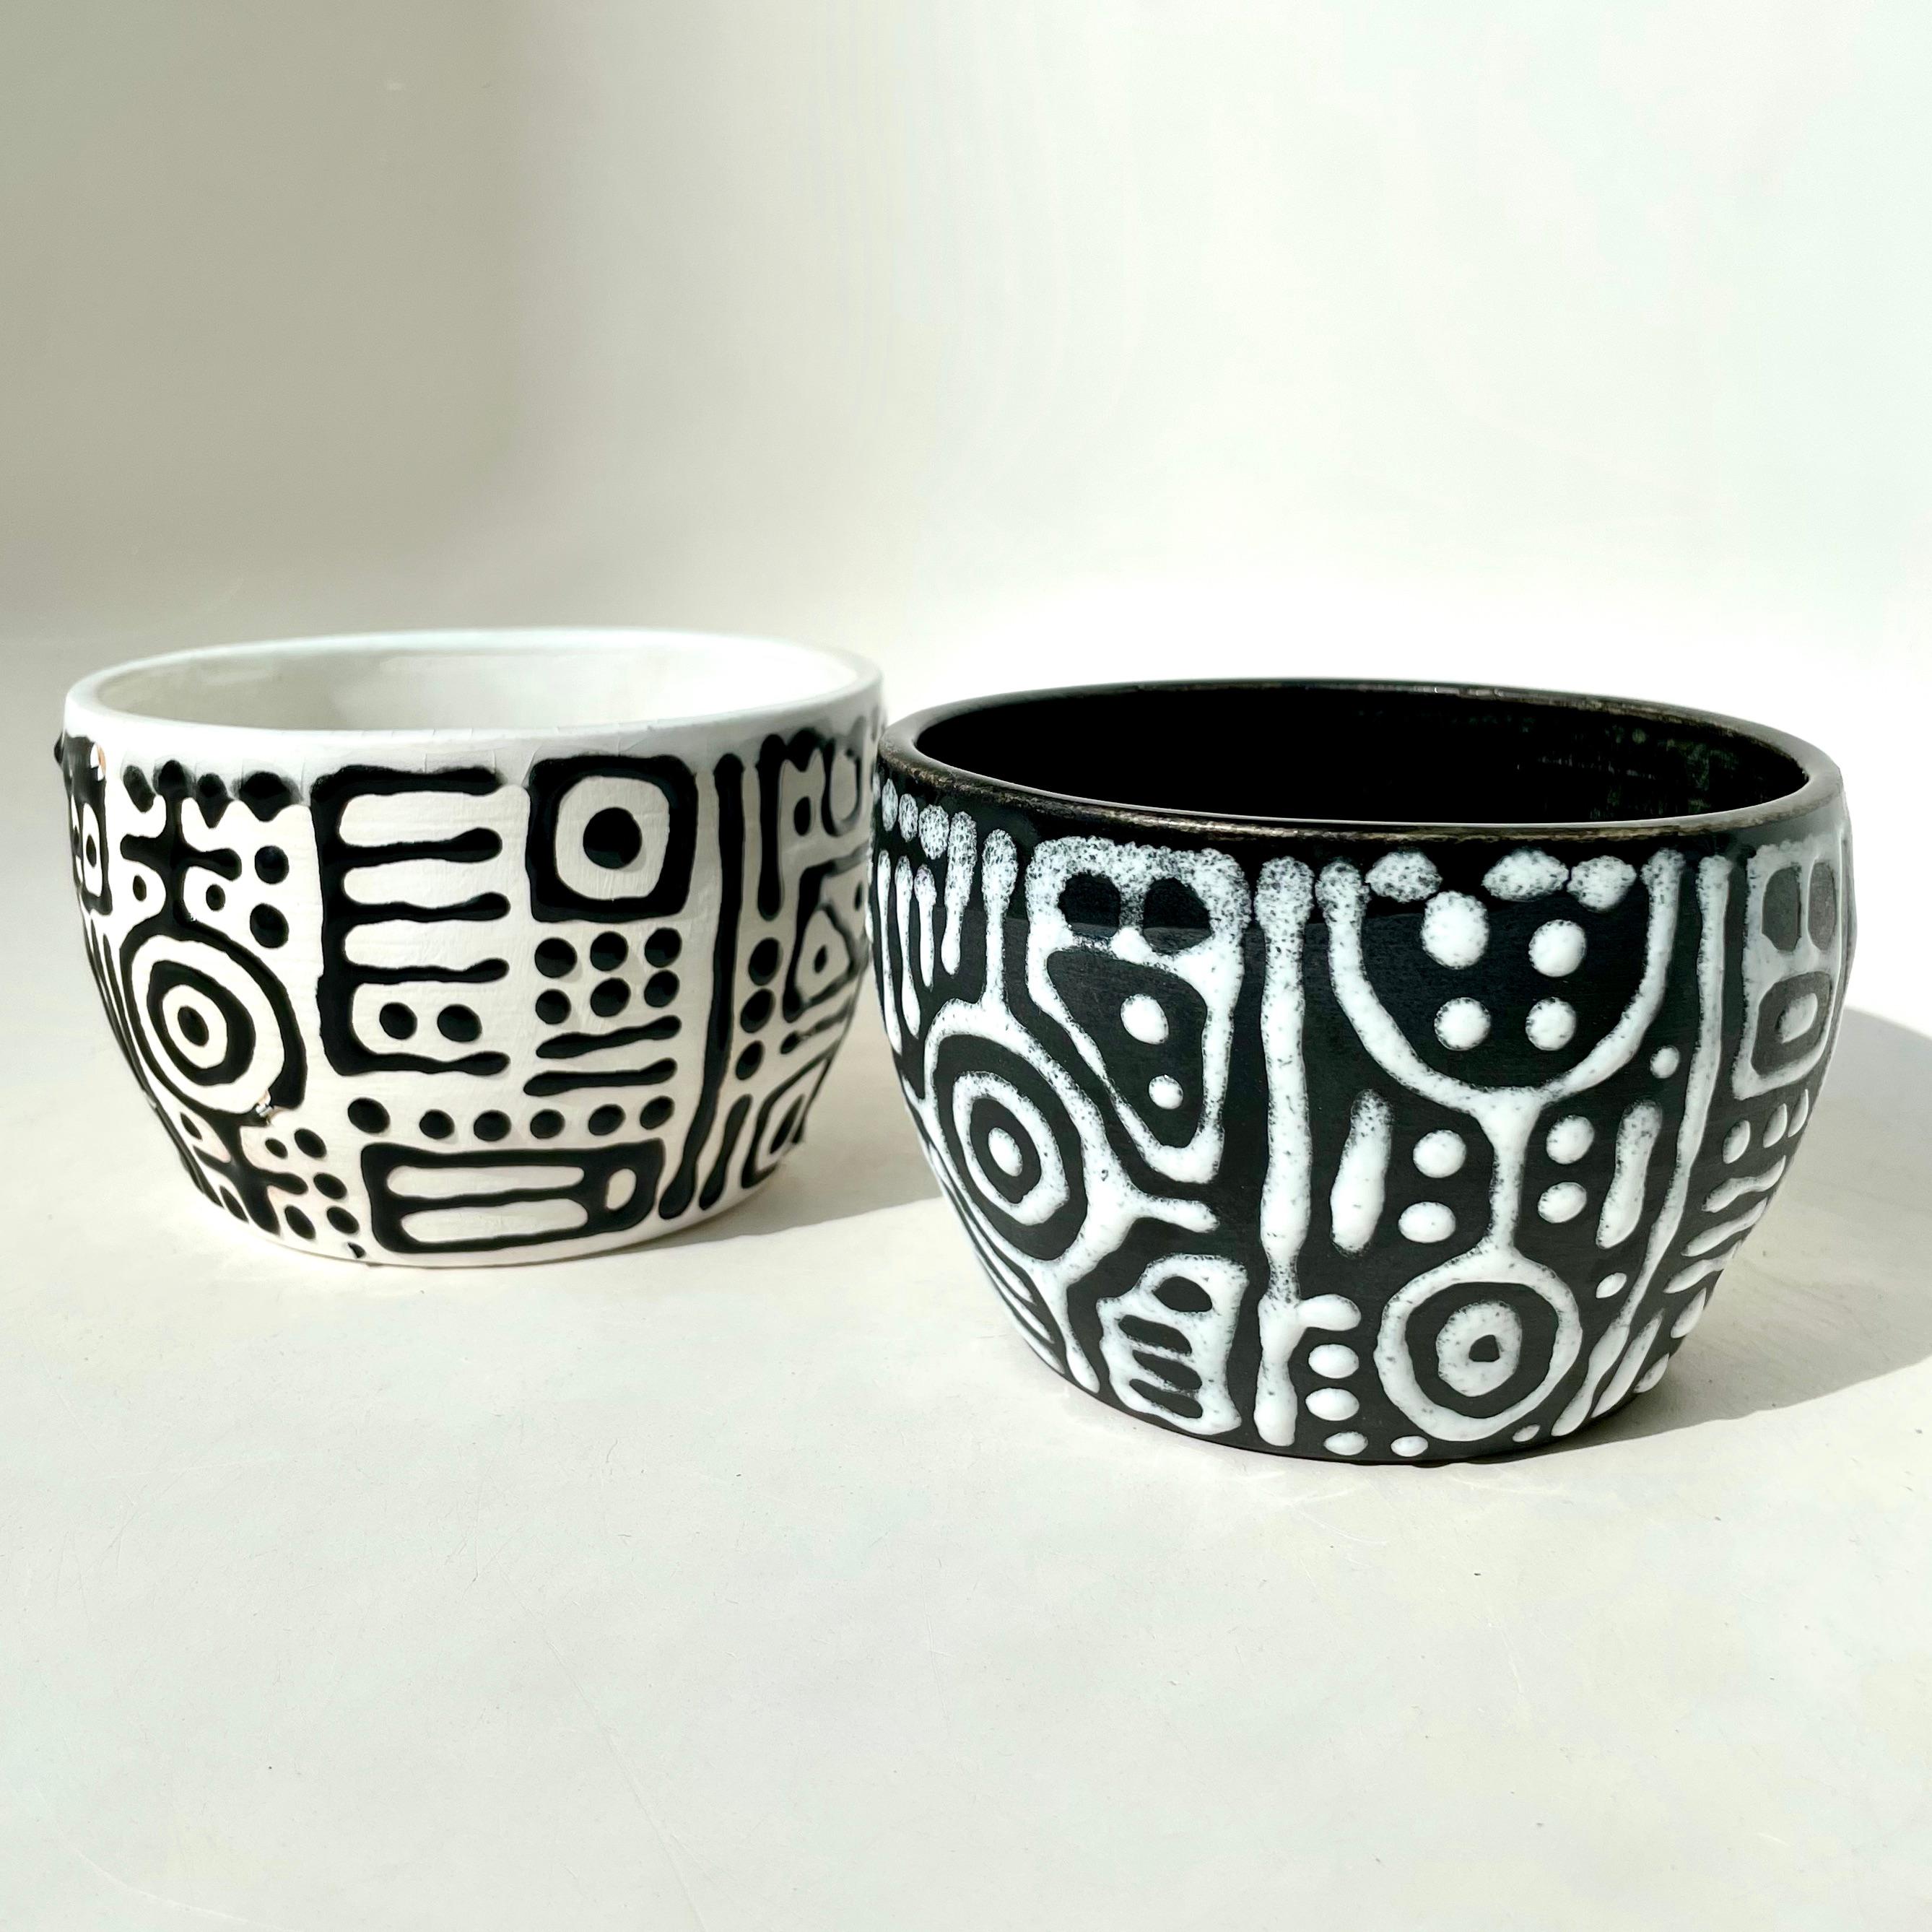 Carved La Mola Tumbler, Handmade and Food Safe, by Artist Stef Duffy For Sale